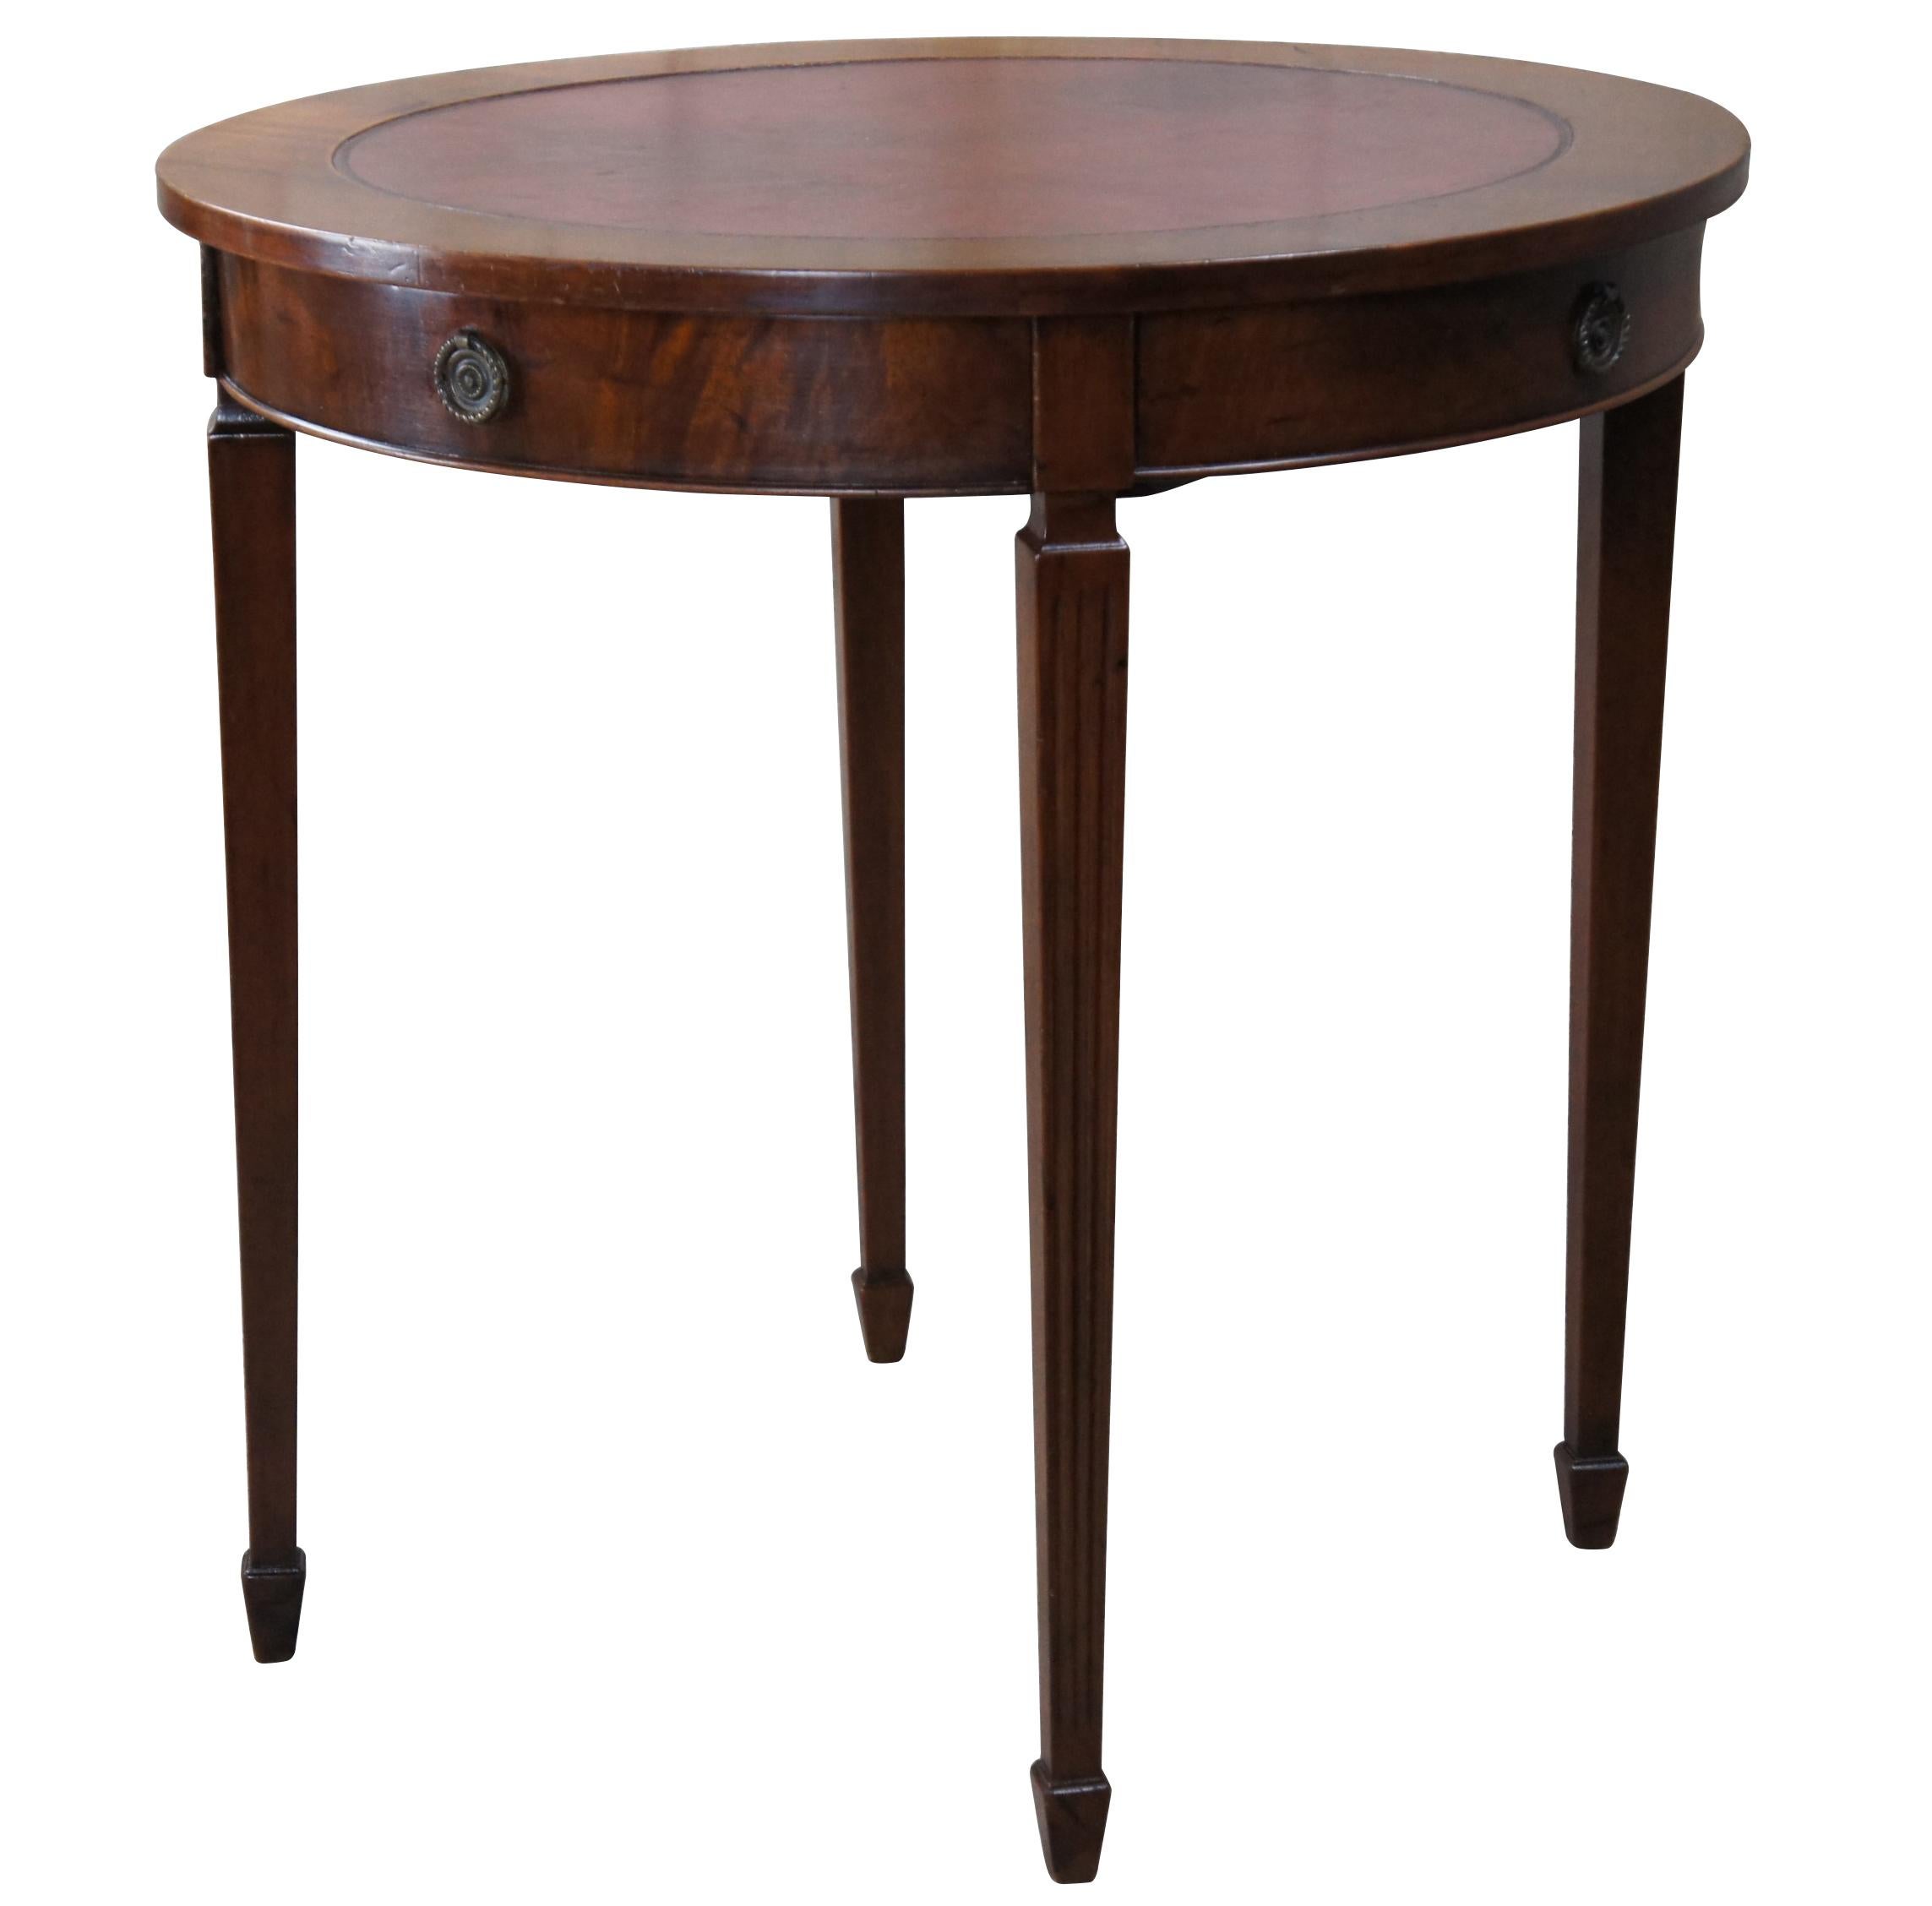 An antique Sheraton style table made by Charak for The H. & S. Pogue Company of Cincinnati, circa 1936. Features a round form with inset red leather top over a flame mahogany frieze with dovetailed drawer and brass hardware. The table is supported